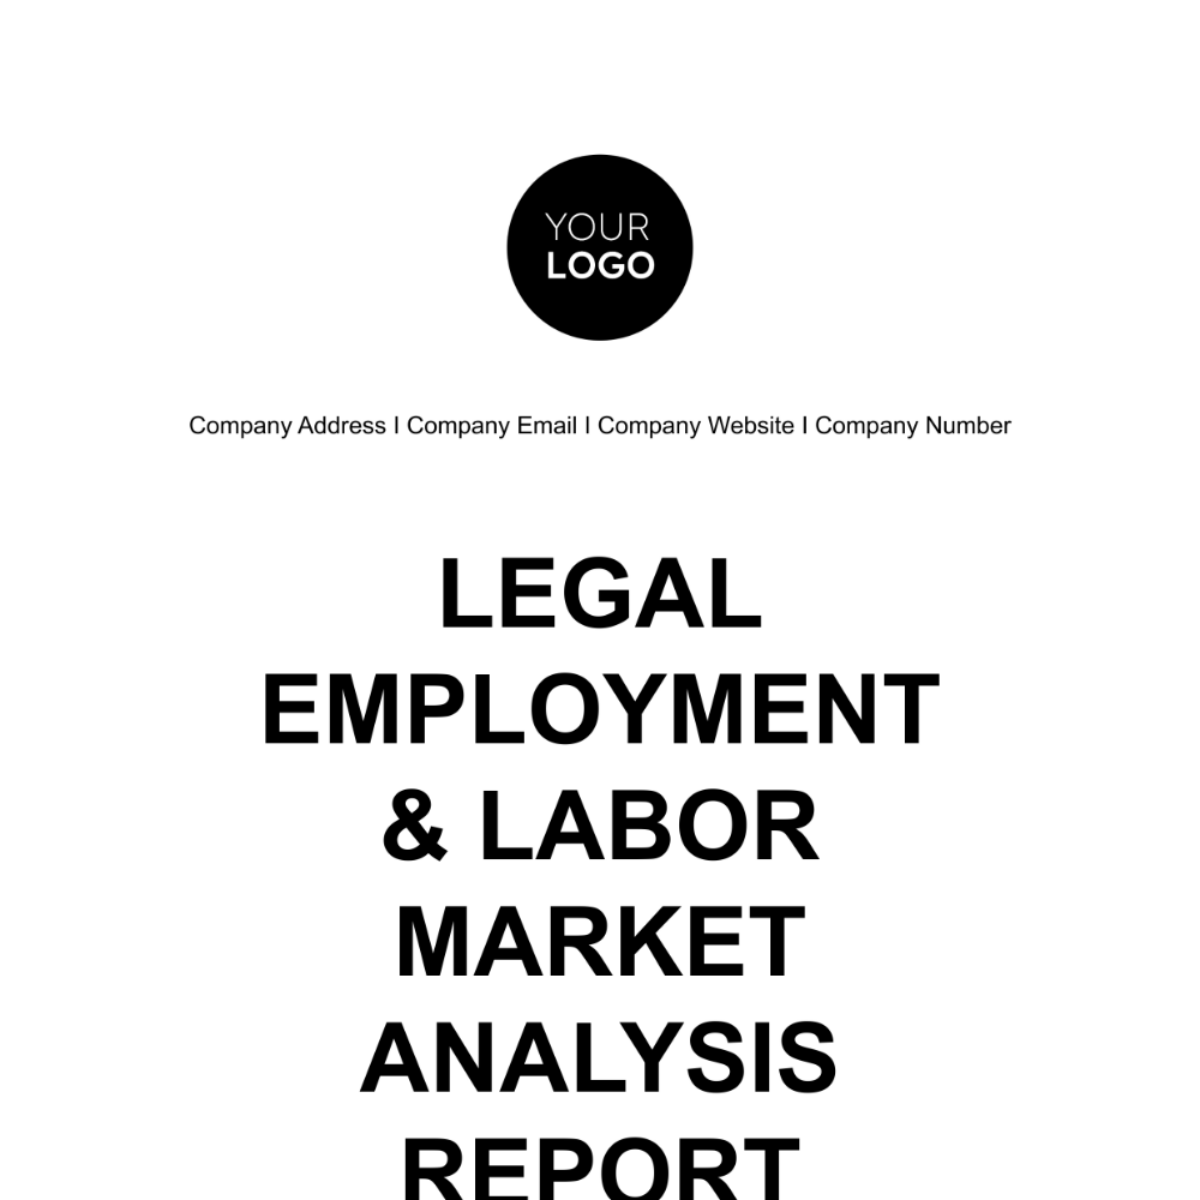 Free Legal Employment & Labor Market Analysis Report Template